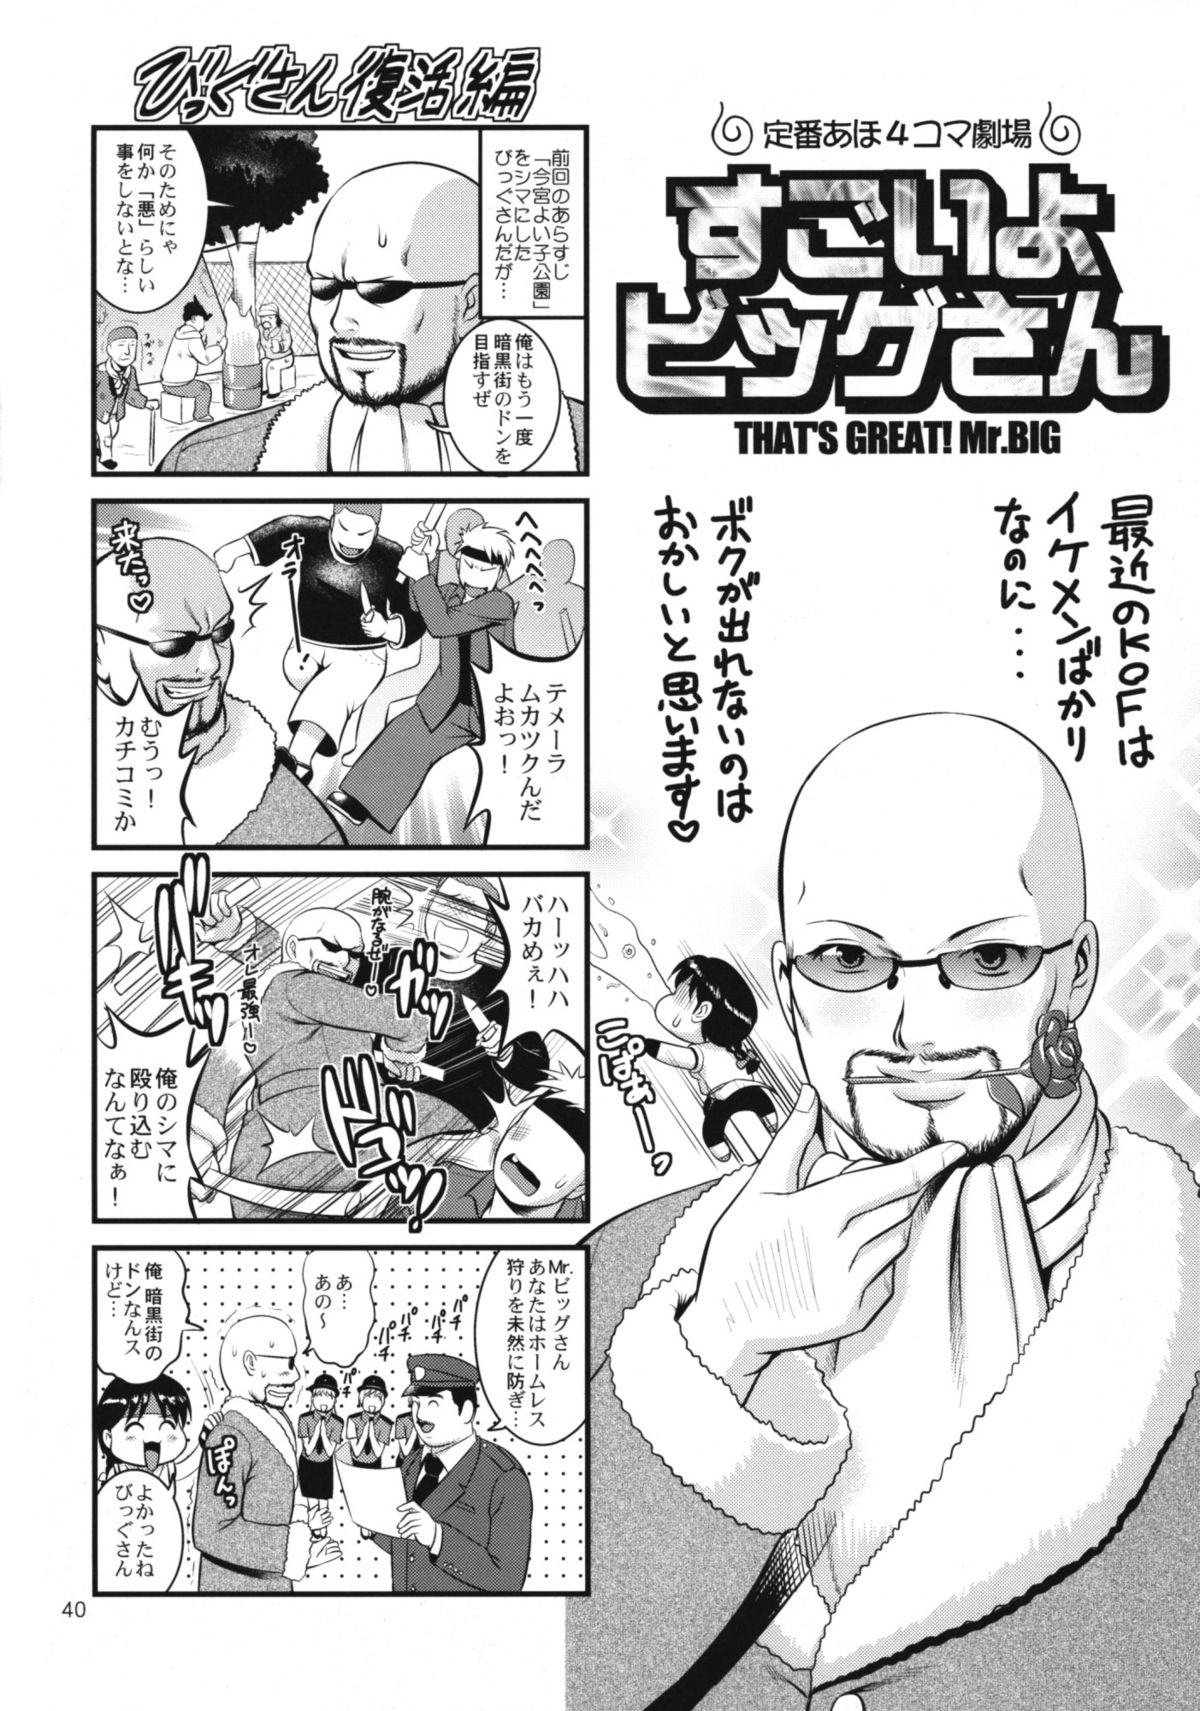 (C77) [Saigado] The Yuri & Friends 2009 UM - Unparticipation of Mai (King of Fighters) page 39 full